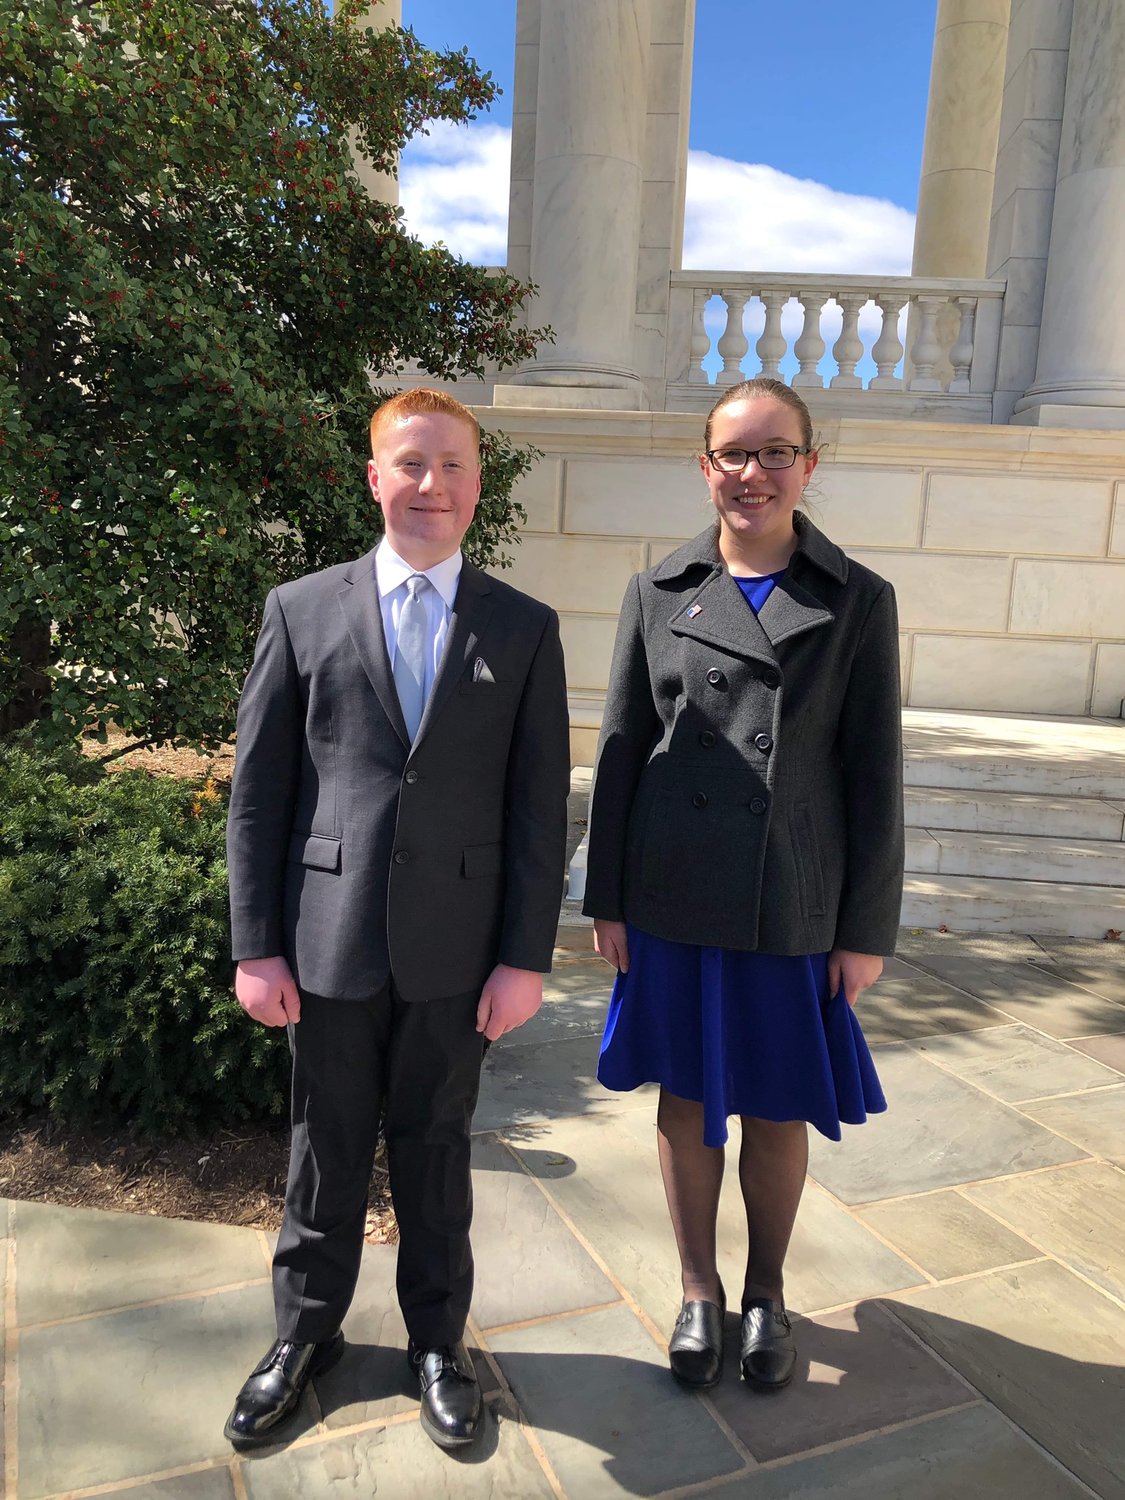 Lucy Wilcox, 14, and Asher Adams, 13, were selected out of about a dozen eighth graders at Centralia Christian School who went on a trip to the Washington, D.C., area.